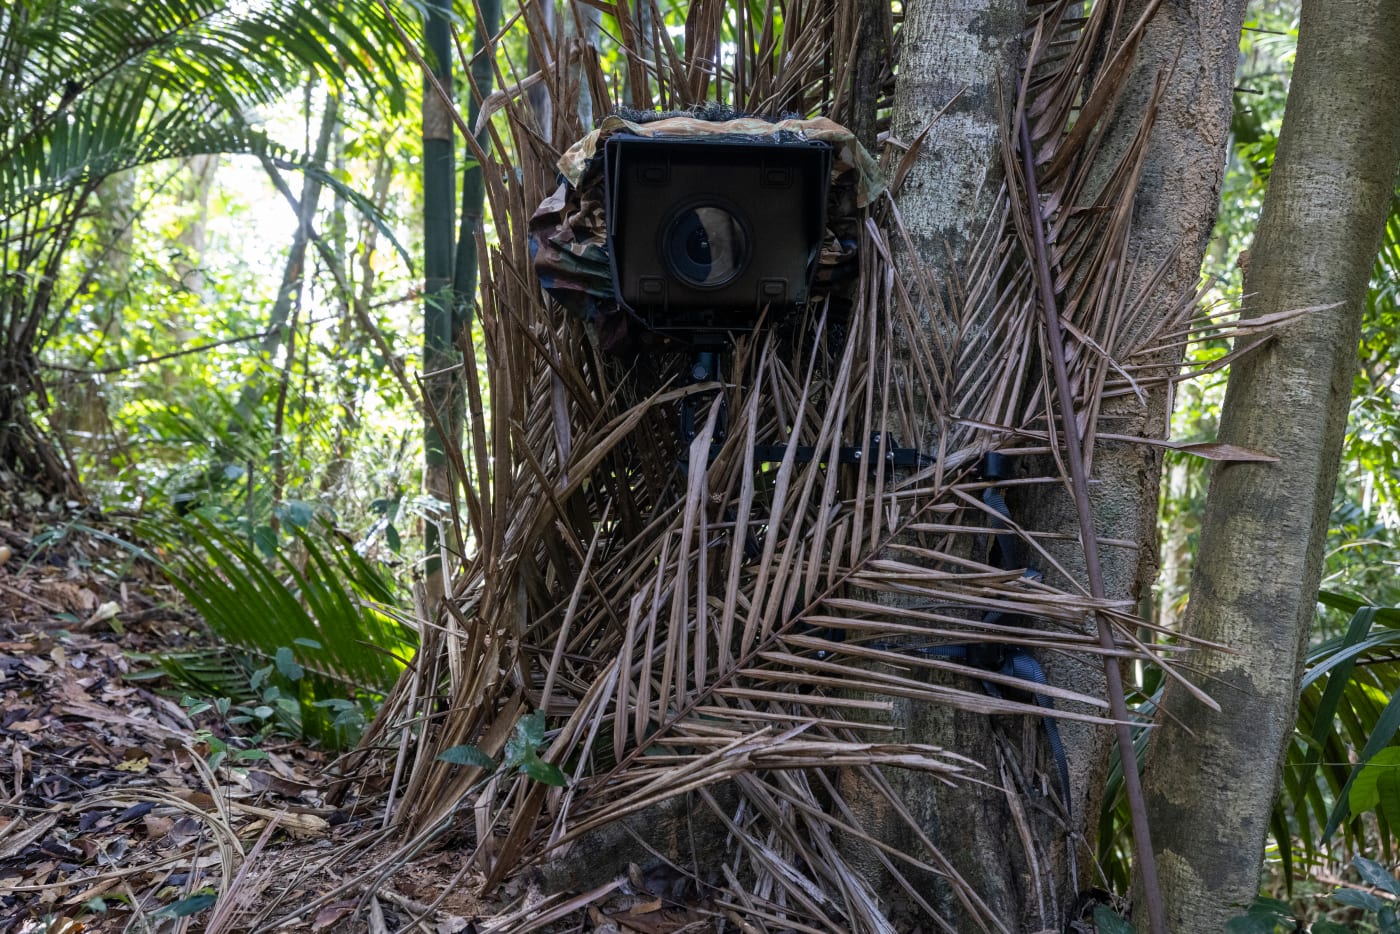 One of Photographer's Emmanuel Rondeau DSLR sensor cameras installed in the forest of Belum State Park, Malaysia